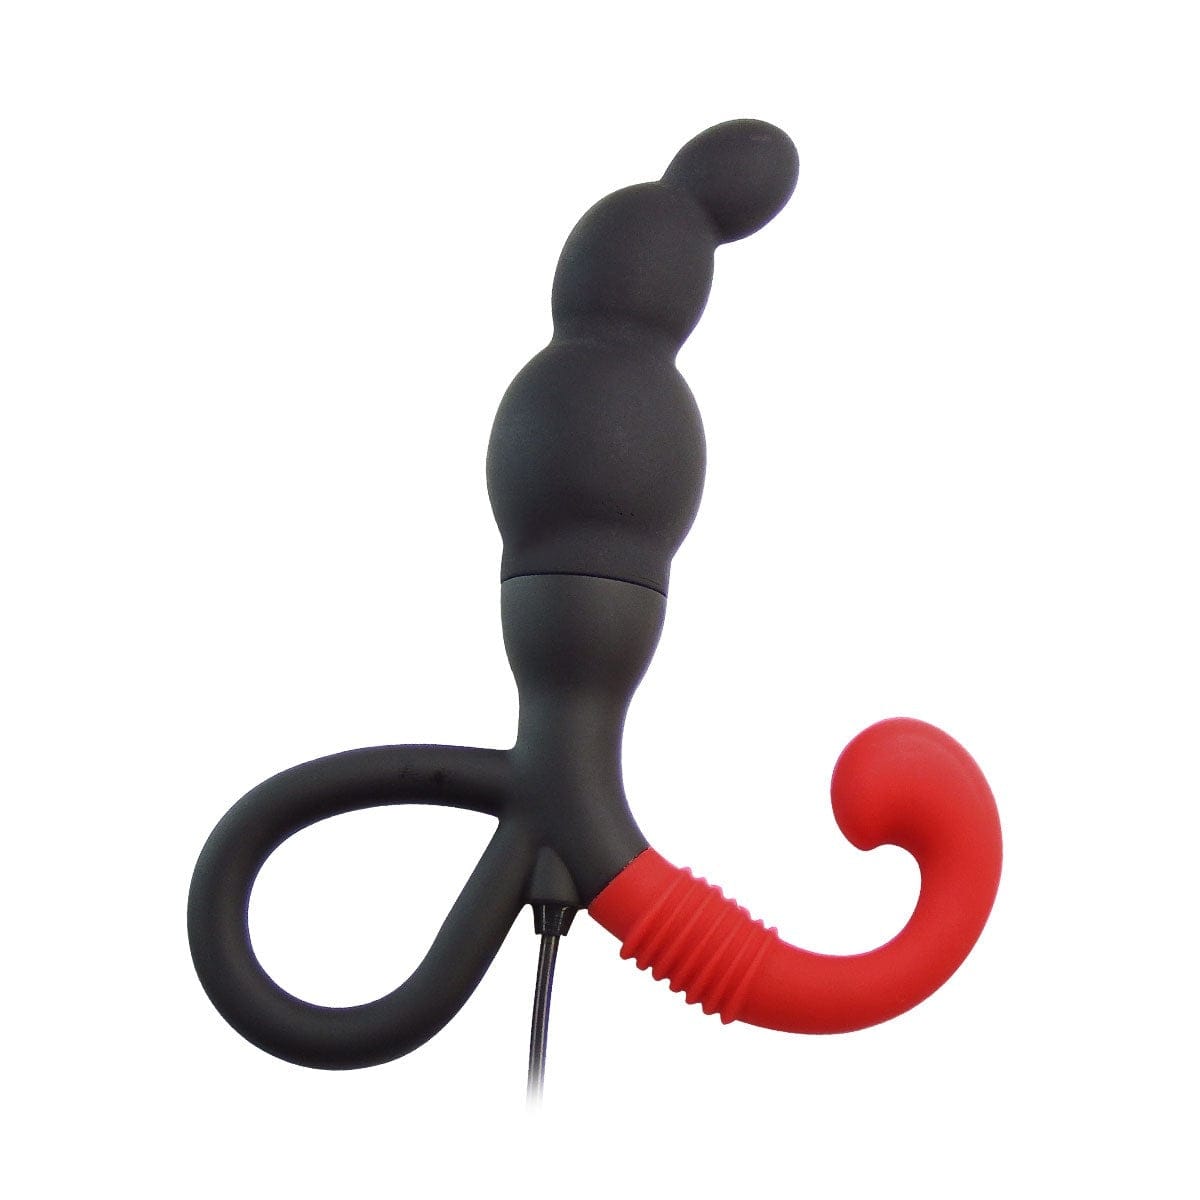 Wild One - Enemable R EX Type β Beta Remote Control Prostate Massager (Black) Remote Control Anal Plug (Vibration) Non Rechargeable 621271247 CherryAffairs